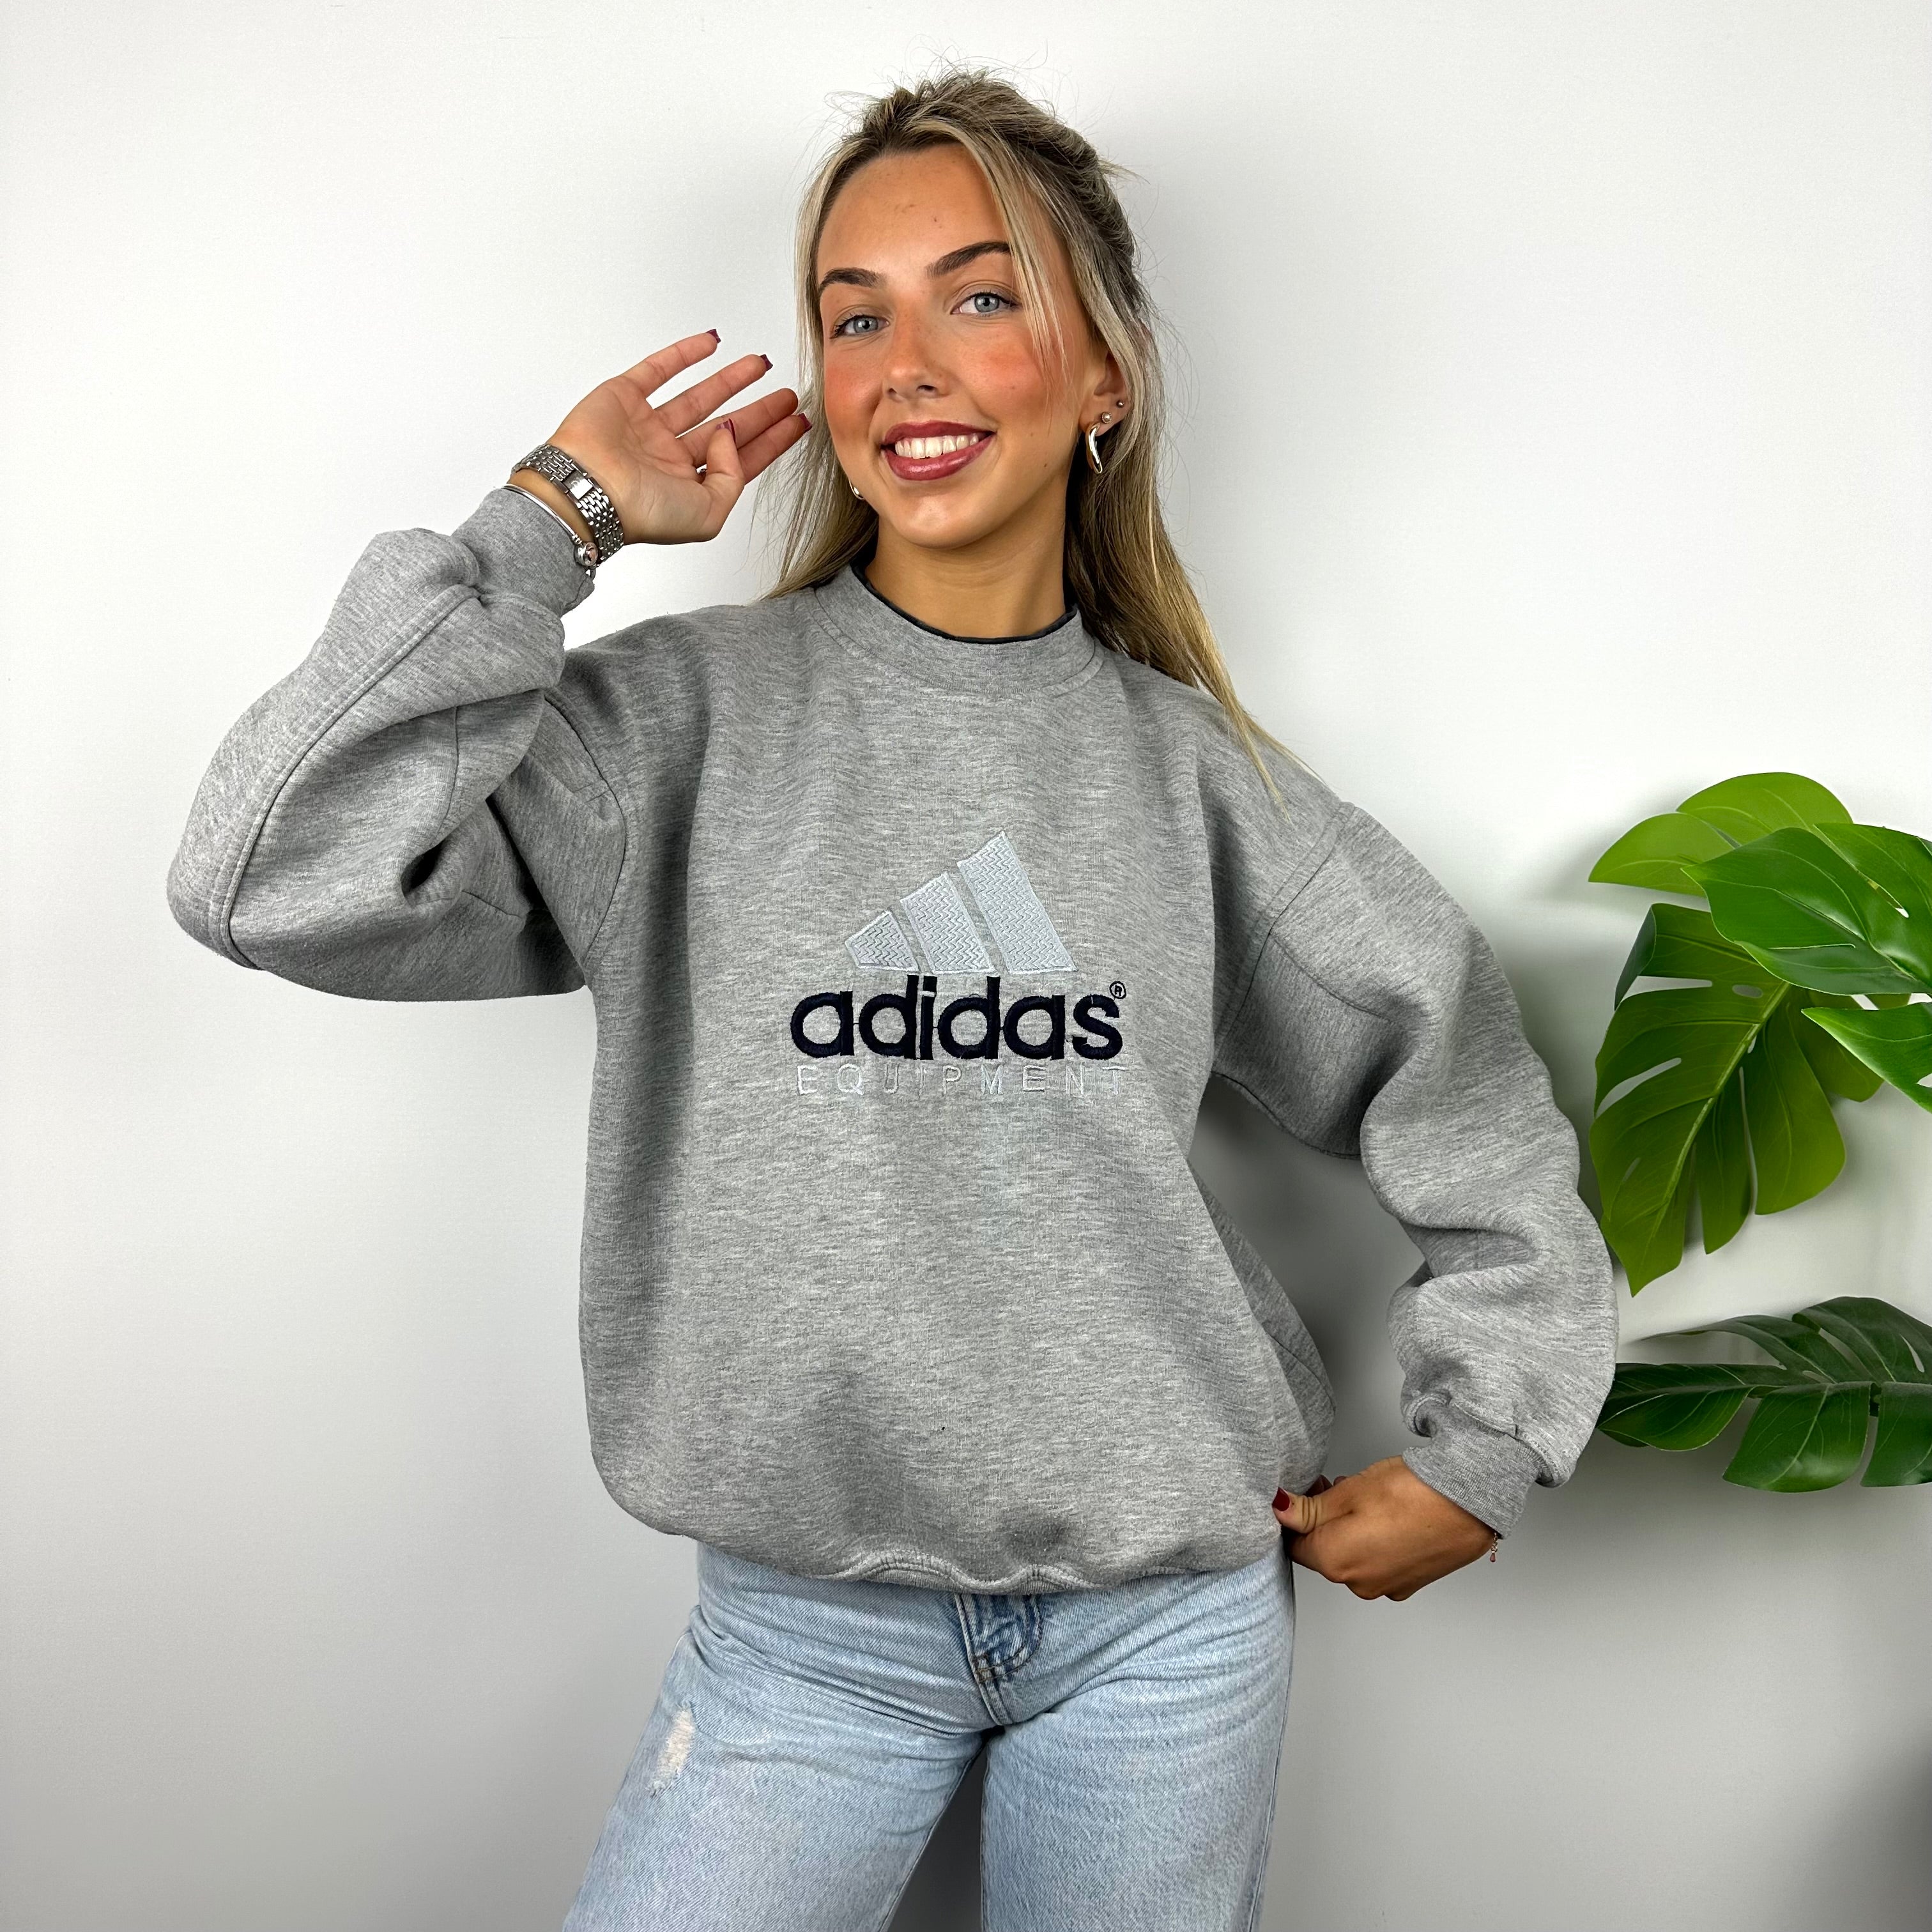 Adidas Equipment RARE Grey Embroidered Spell Out Sweatshirt (M)